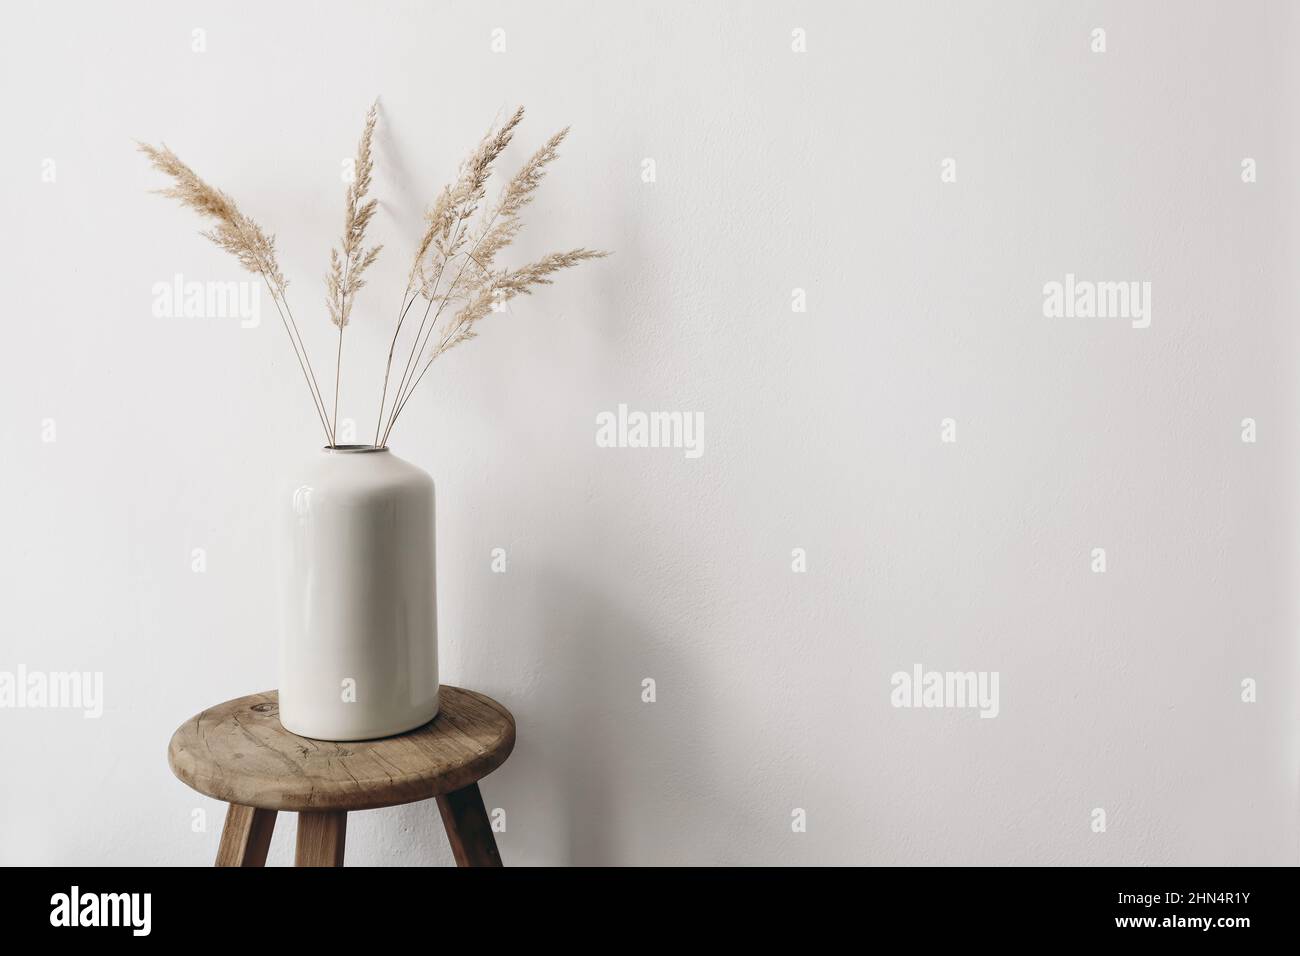 Modern summer, fall still life photo. Grey ceramic vase with dry festuca grass on old wooden stool. White wall background. Empty copy space. Elegant Stock Photo